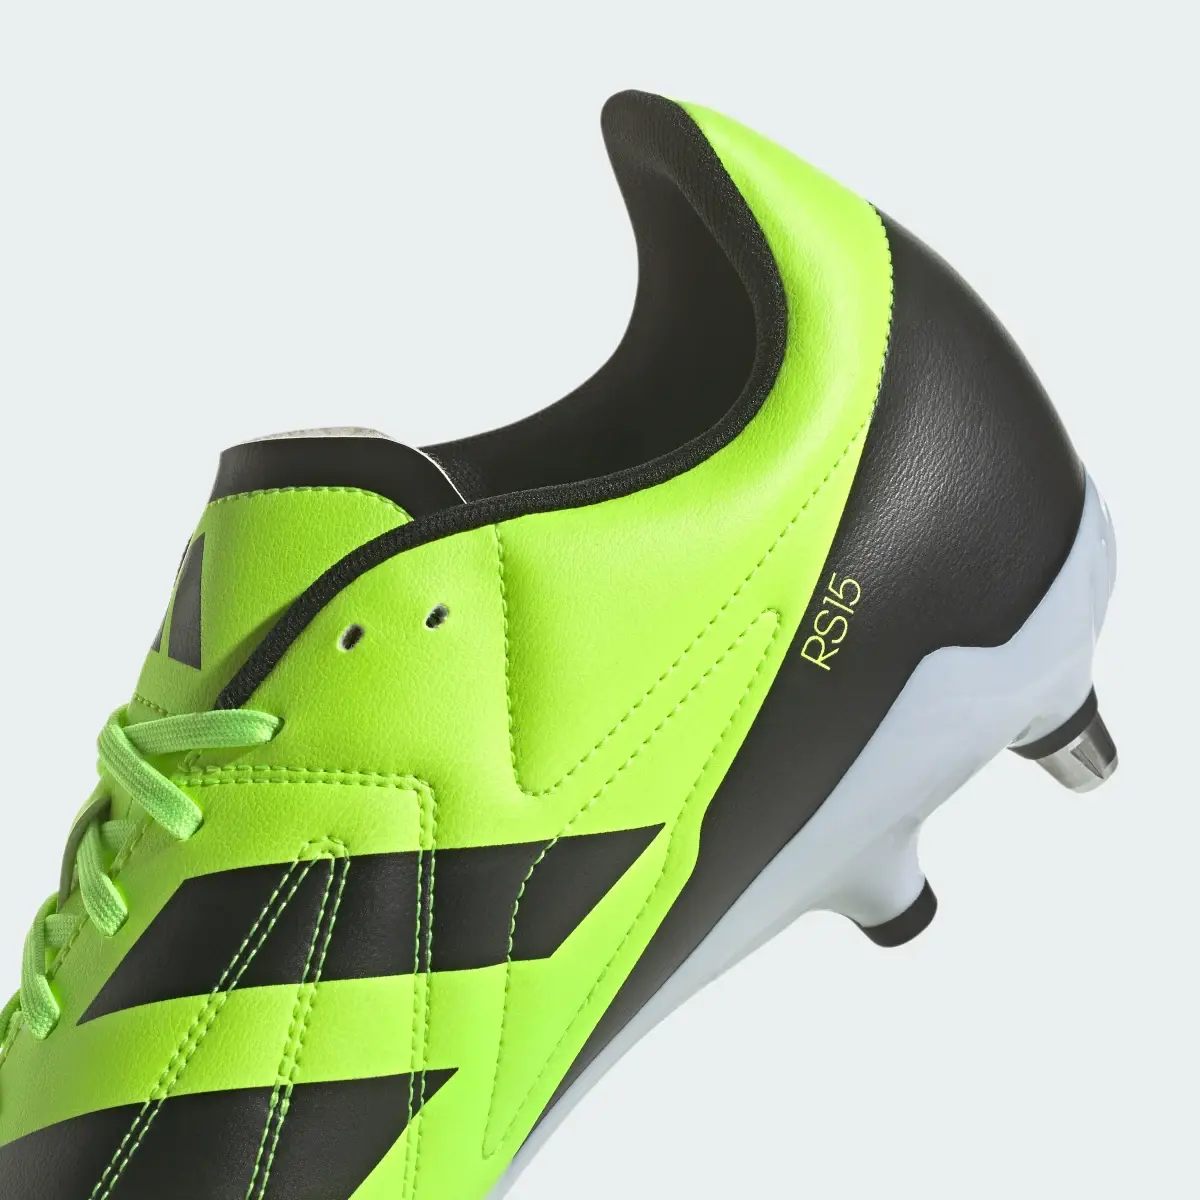 Adidas RS15 Soft Ground Rugby Boots. 3